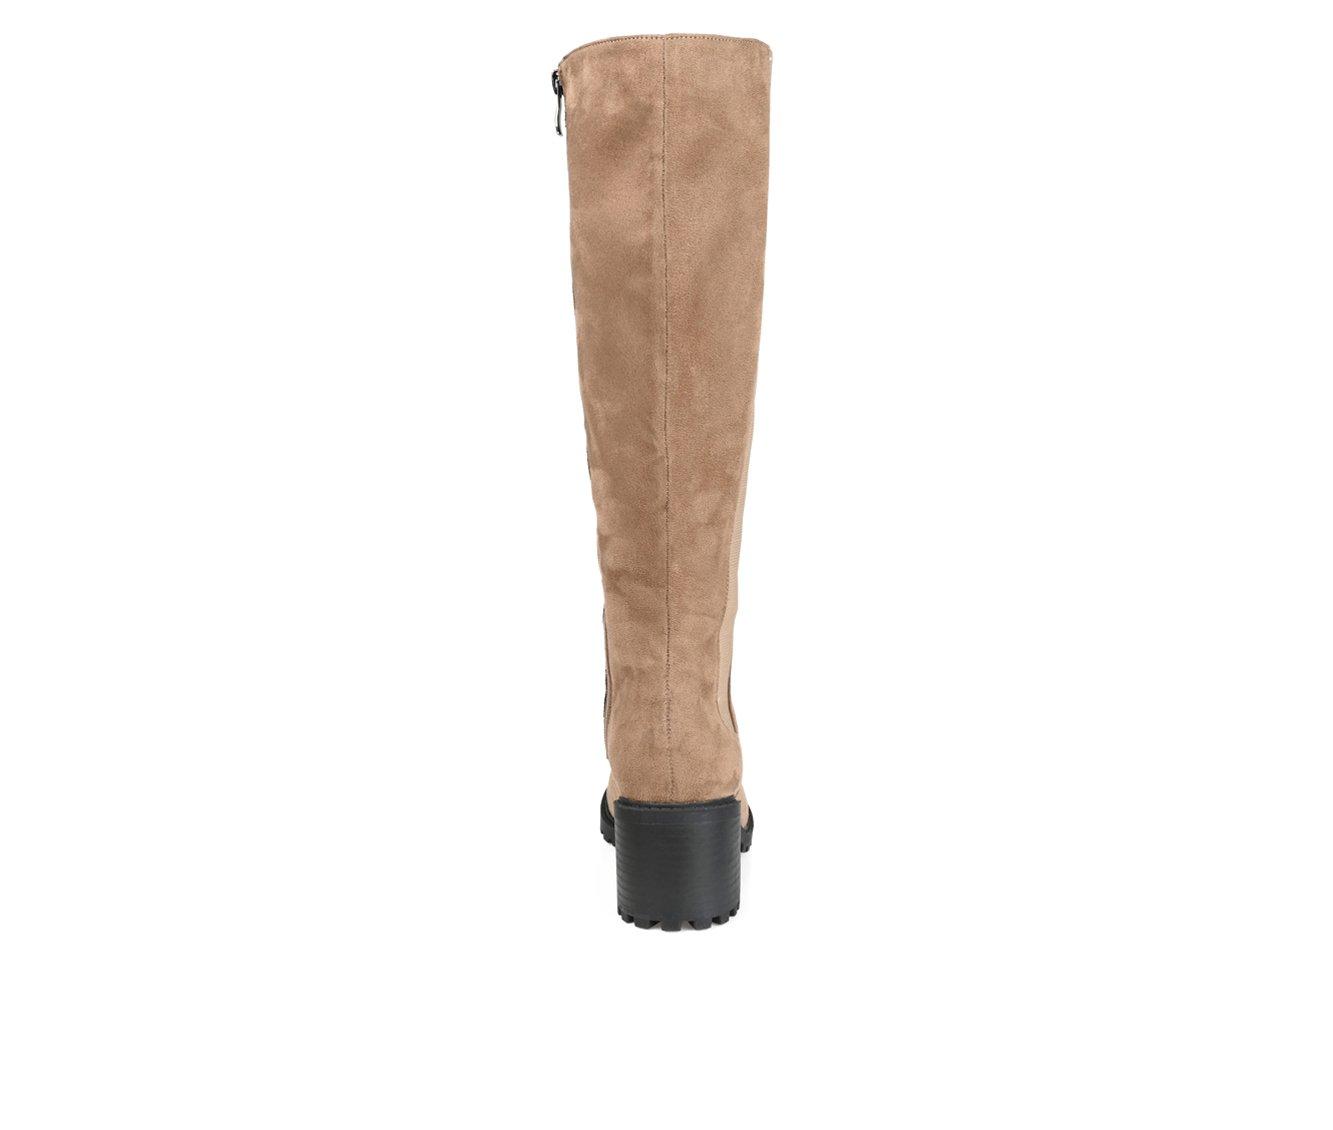 Women's Journee Collection Jenicca Extra Wide Calf Knee High Boots